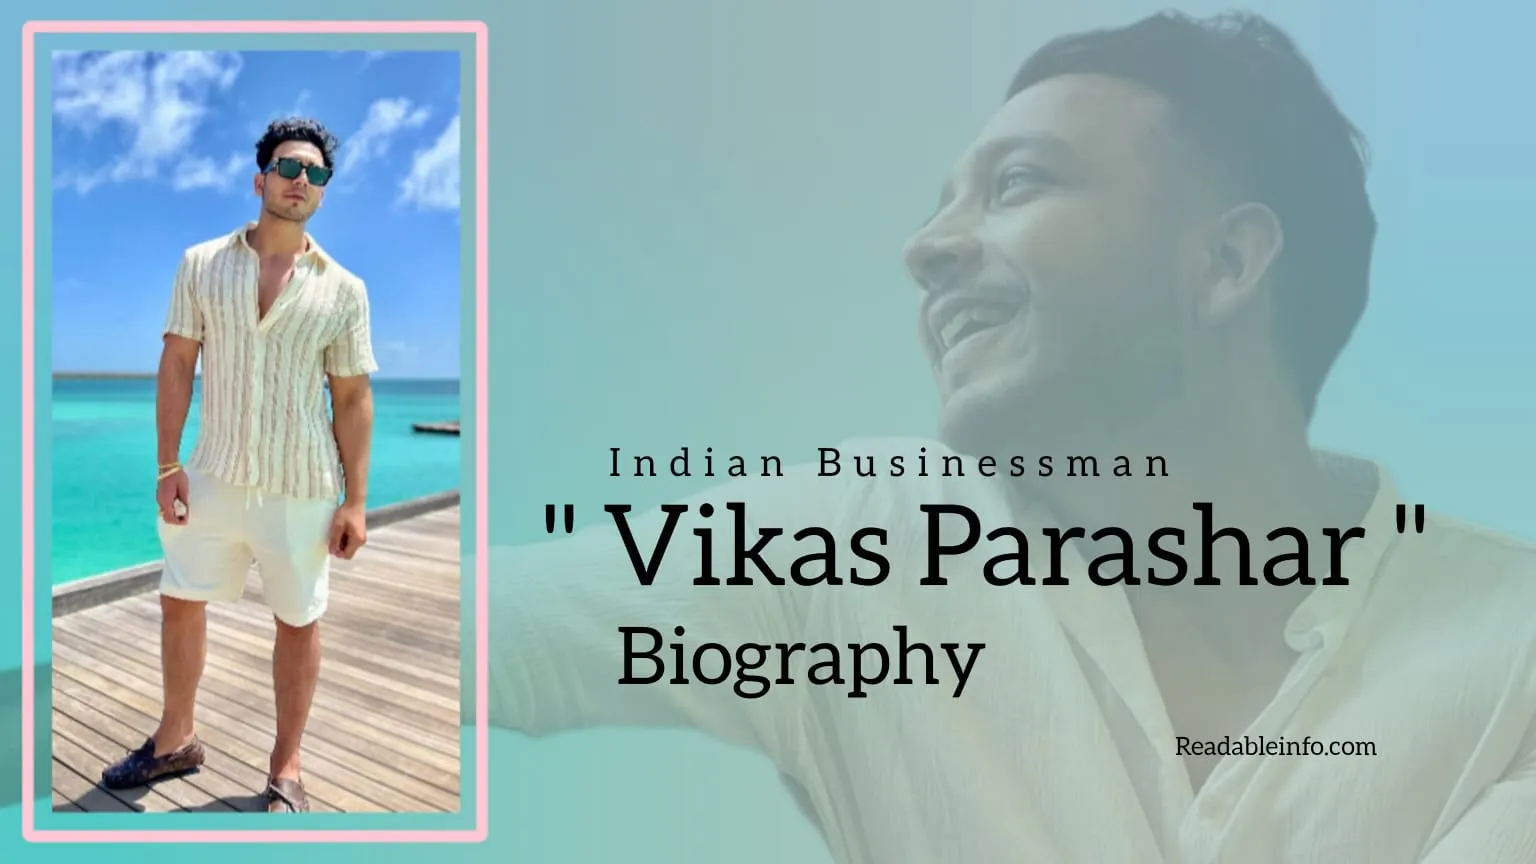 You are currently viewing Vikas Parashar Biography (Indian Businessman)